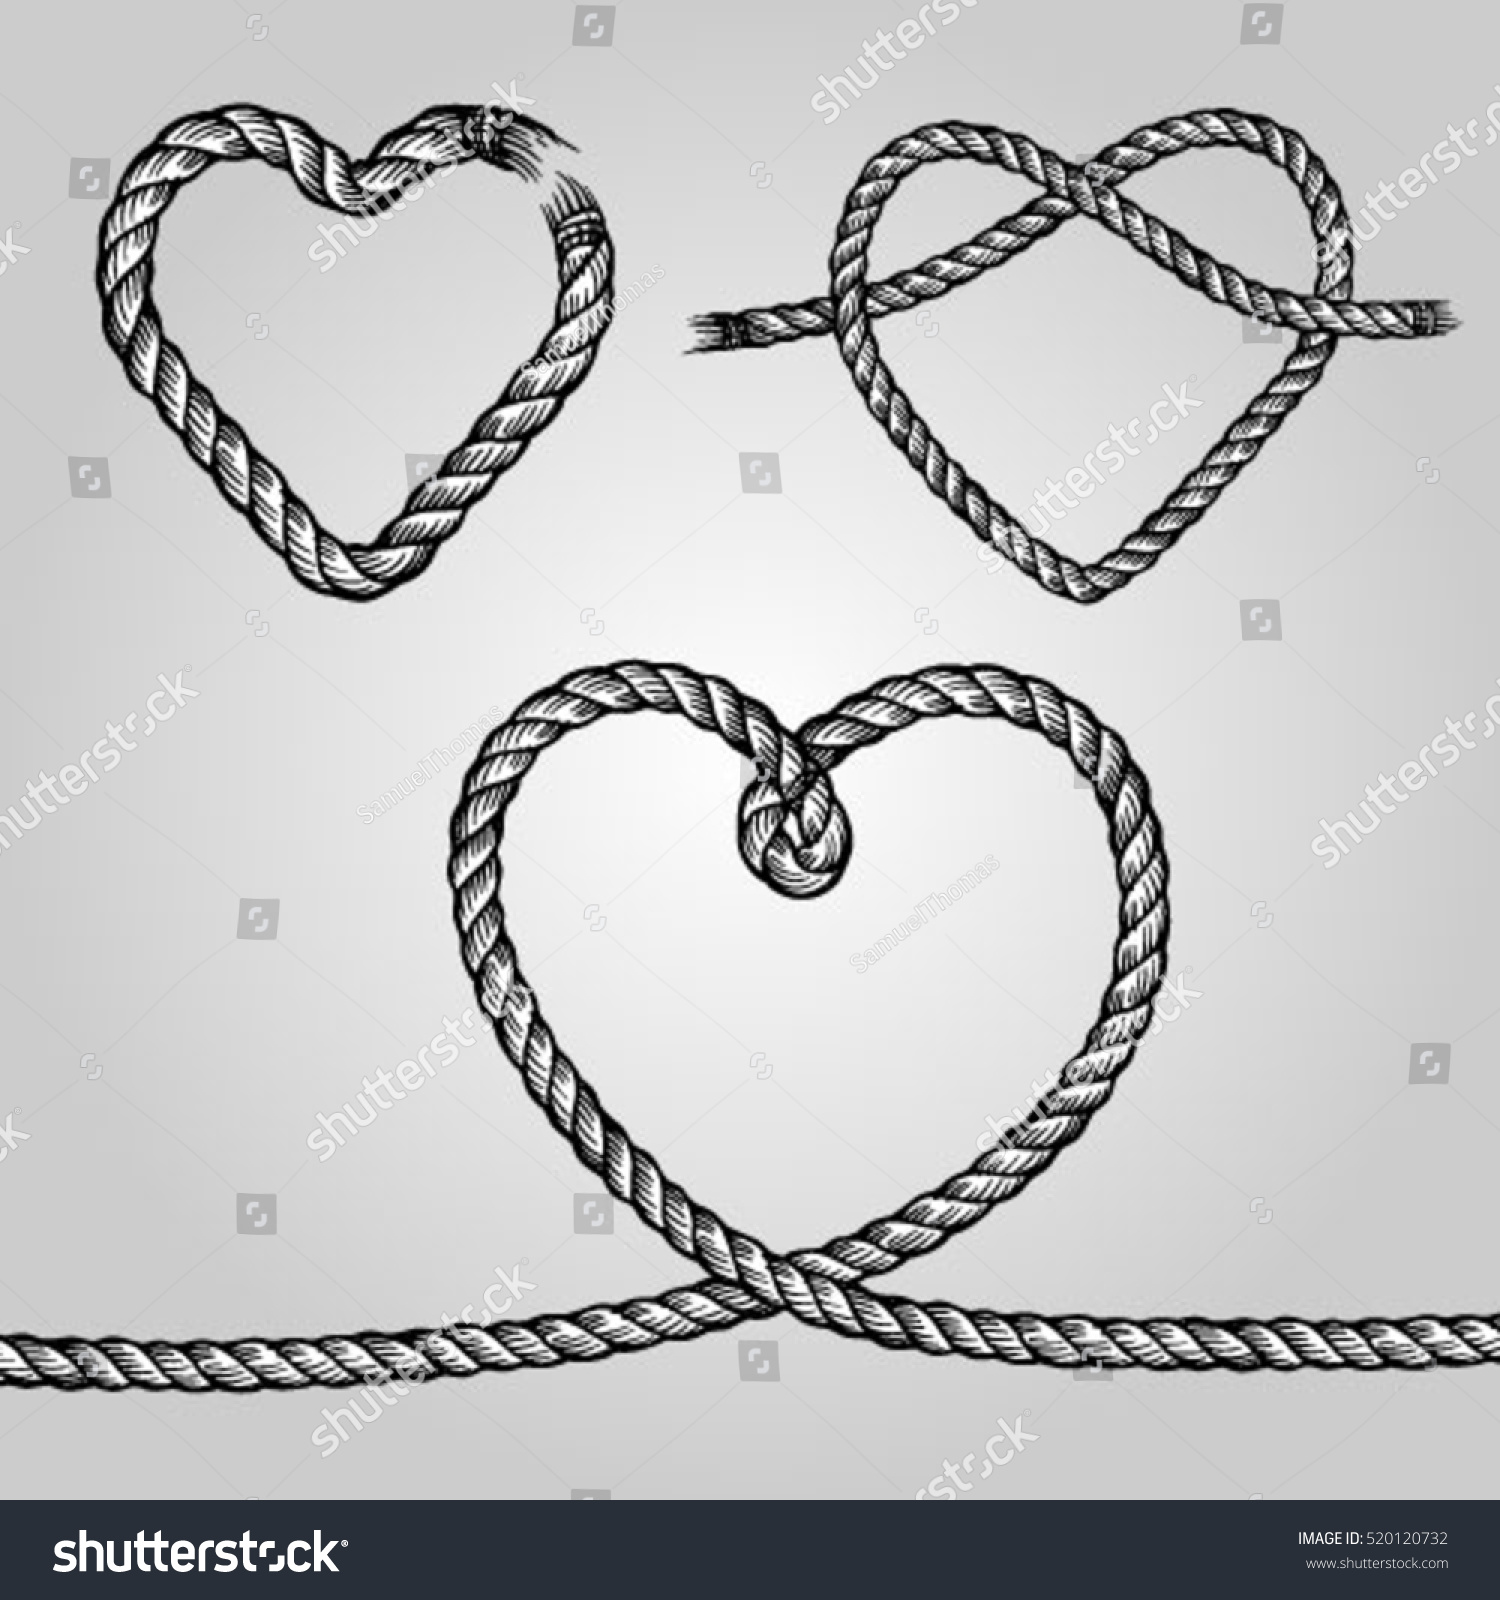 Rope Heart Drawing - ClipartXtras